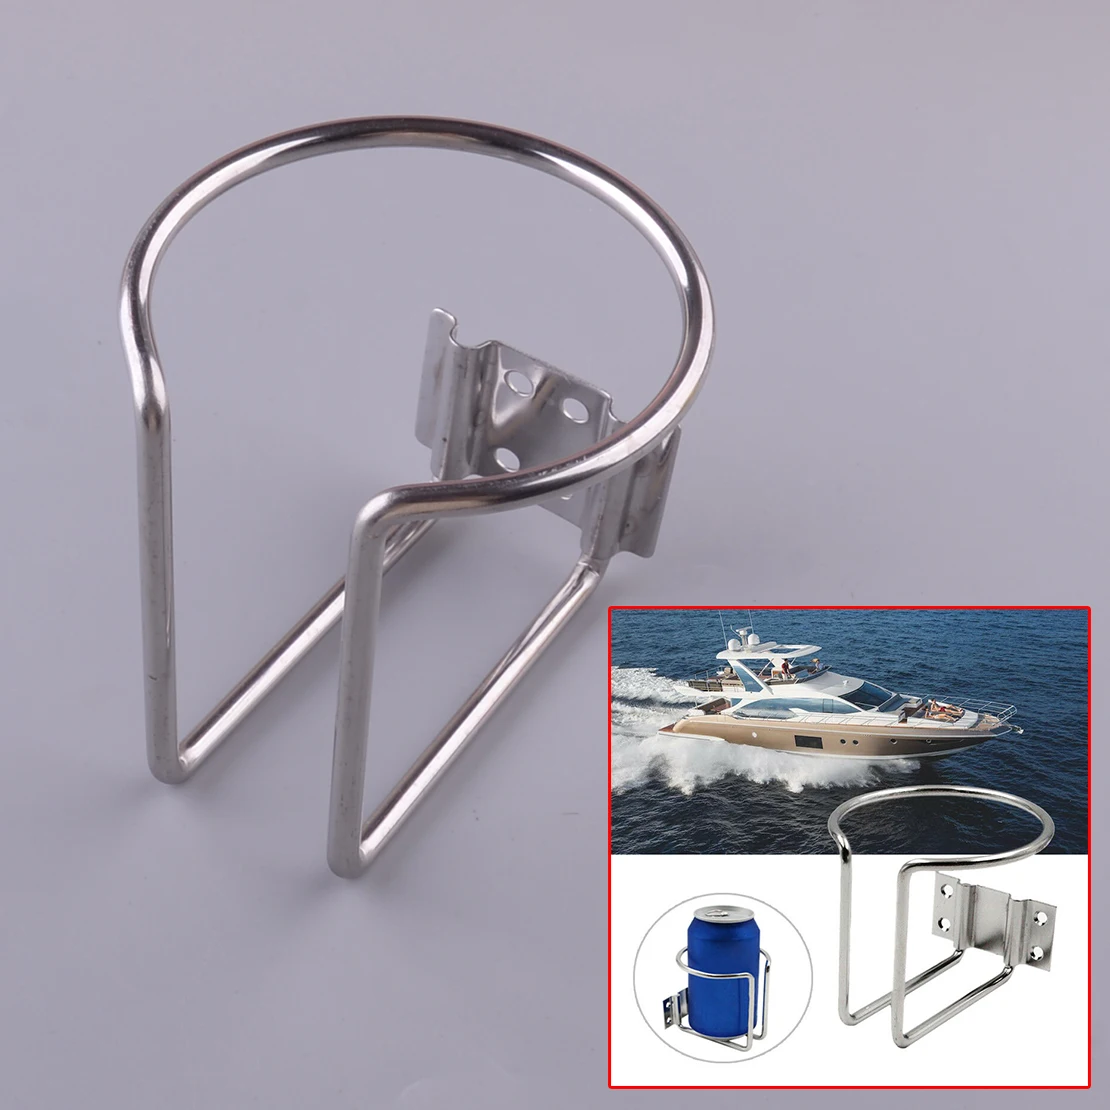 Silver StainlessSteel Car Boat Ring Cups Drink Holder For Marine Yacht Truck RV. 